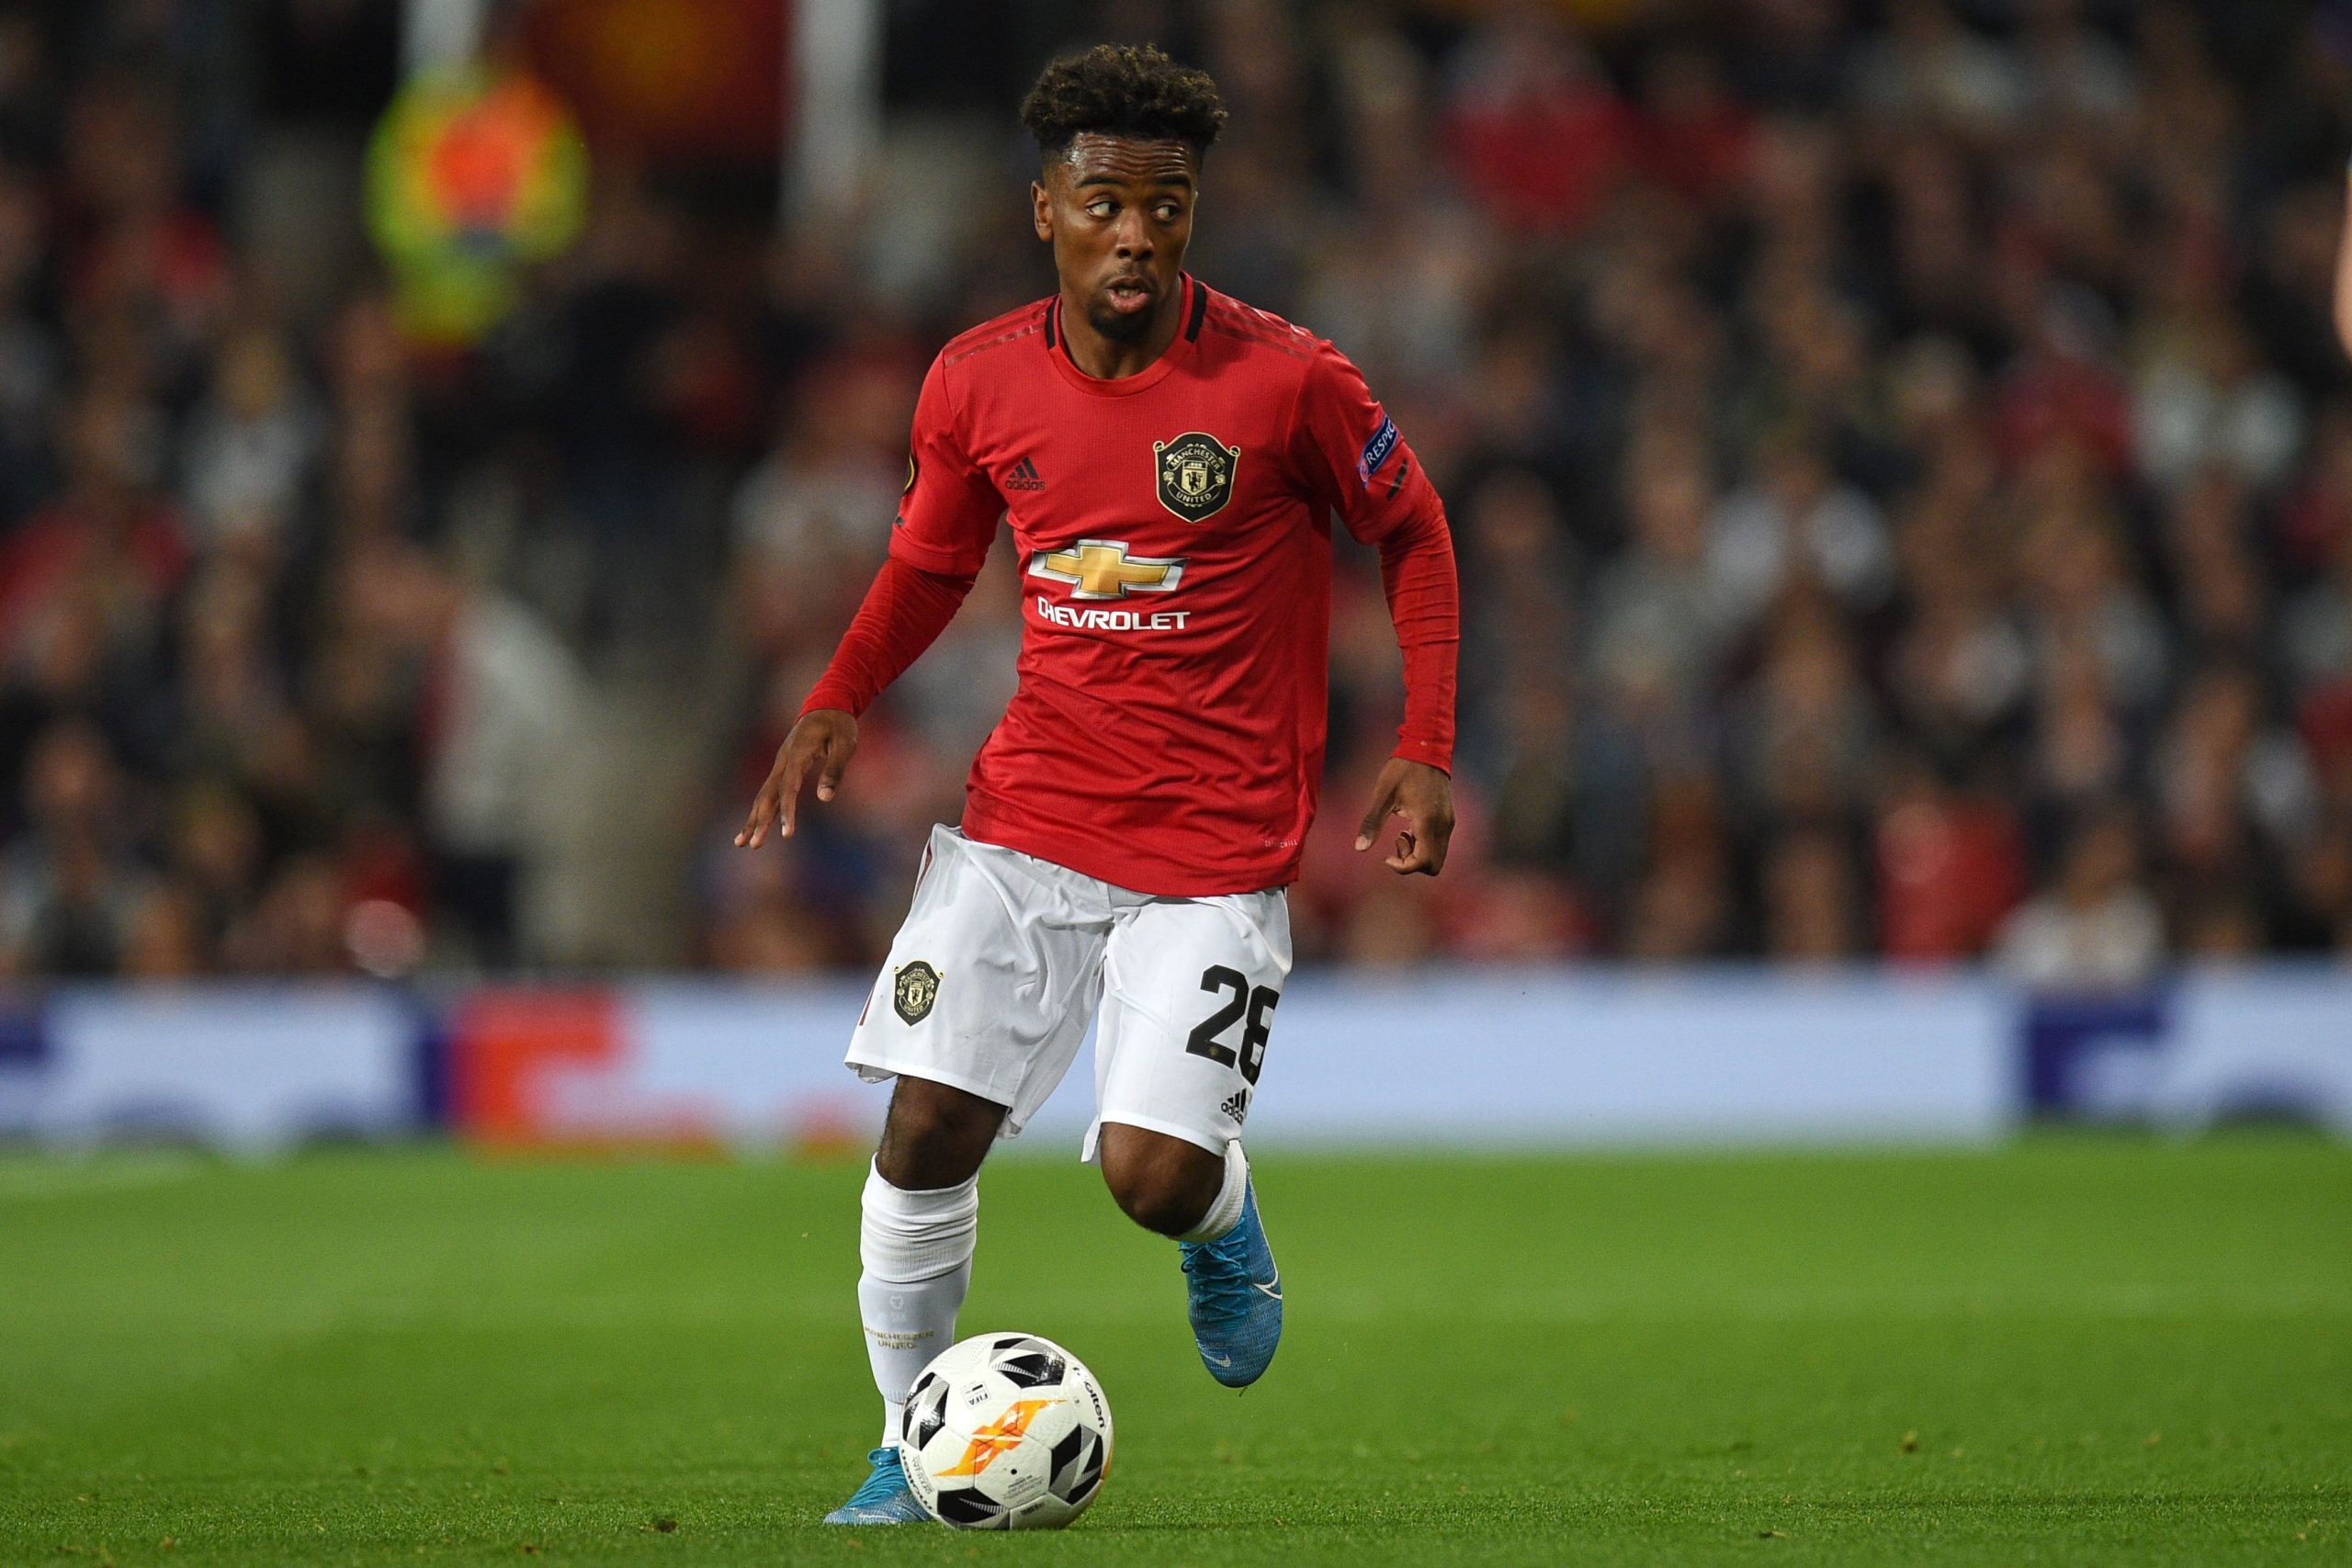 Angel Gomes is one of the bright talents at Manchester United